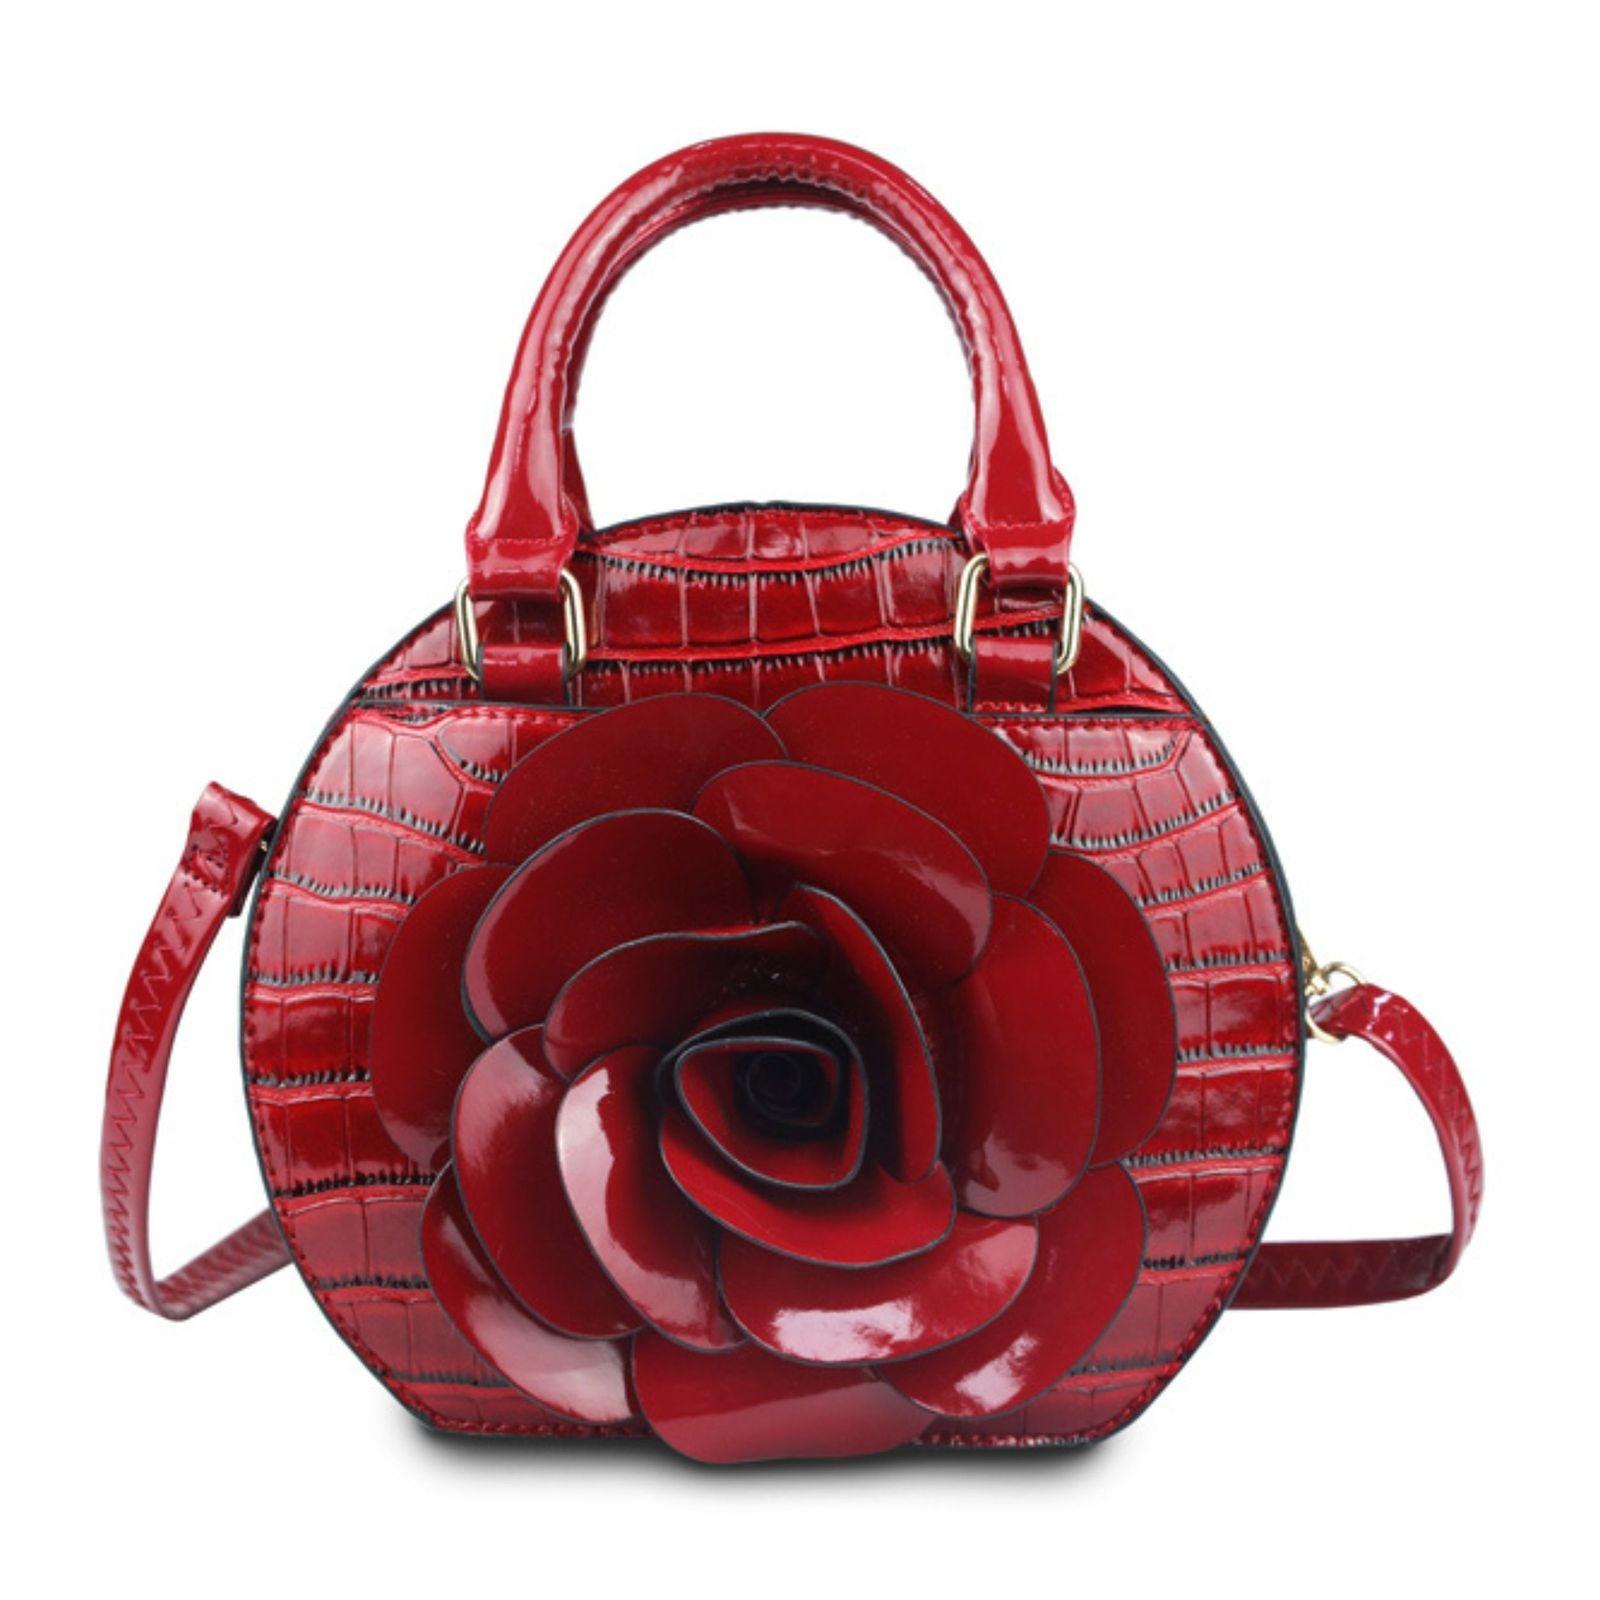 Stylish Red Dimensional Flower Handbag with Top Handles